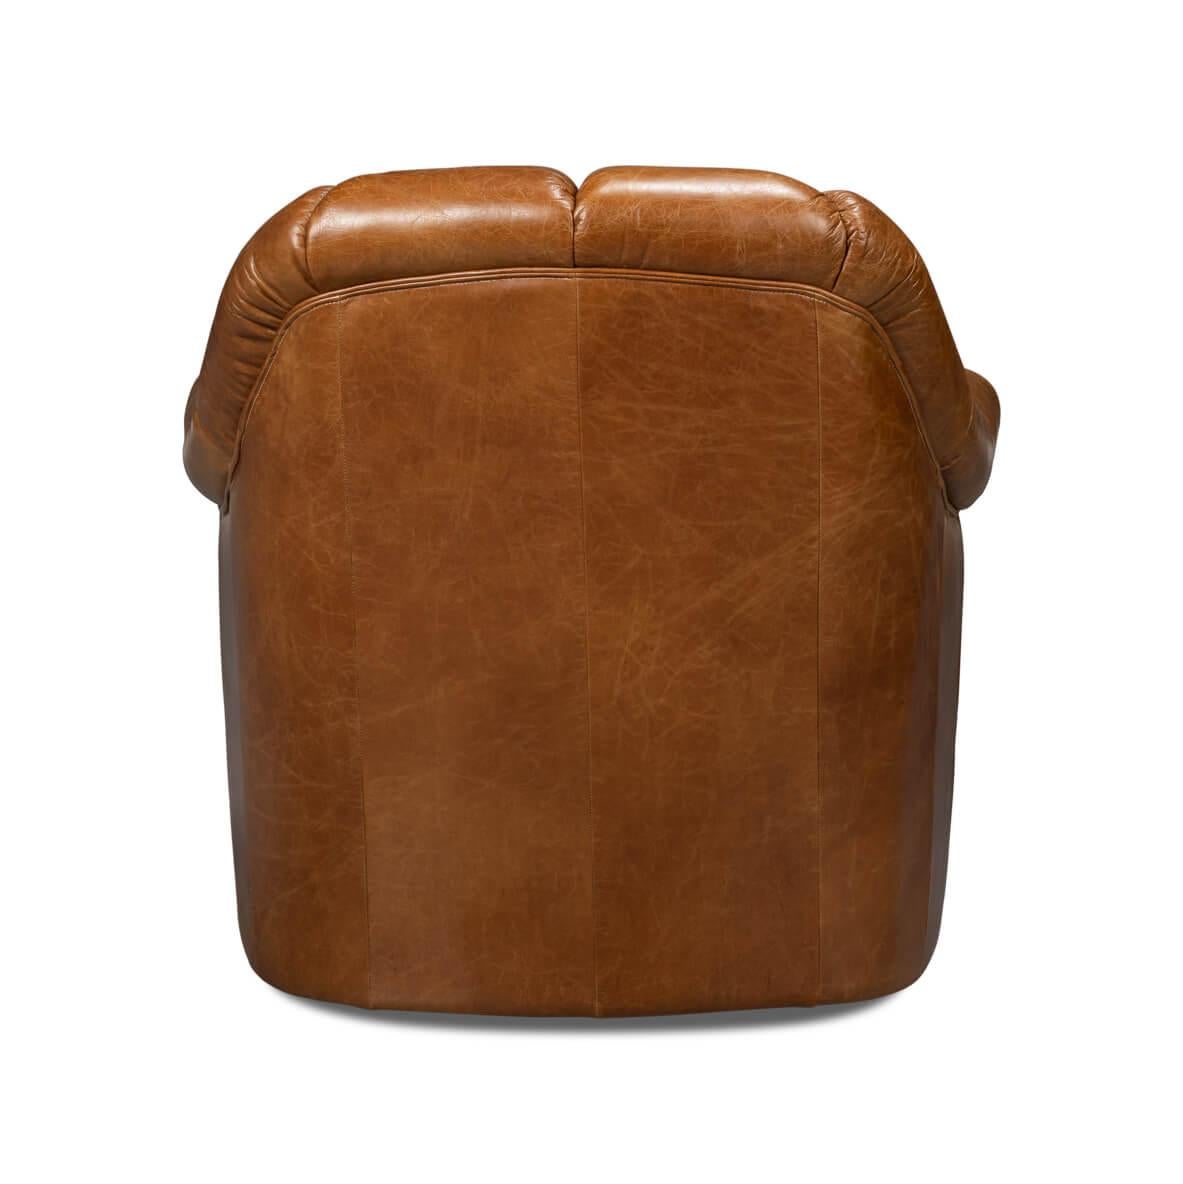 Asian Medium Brown Leather Swivel Chair For Sale